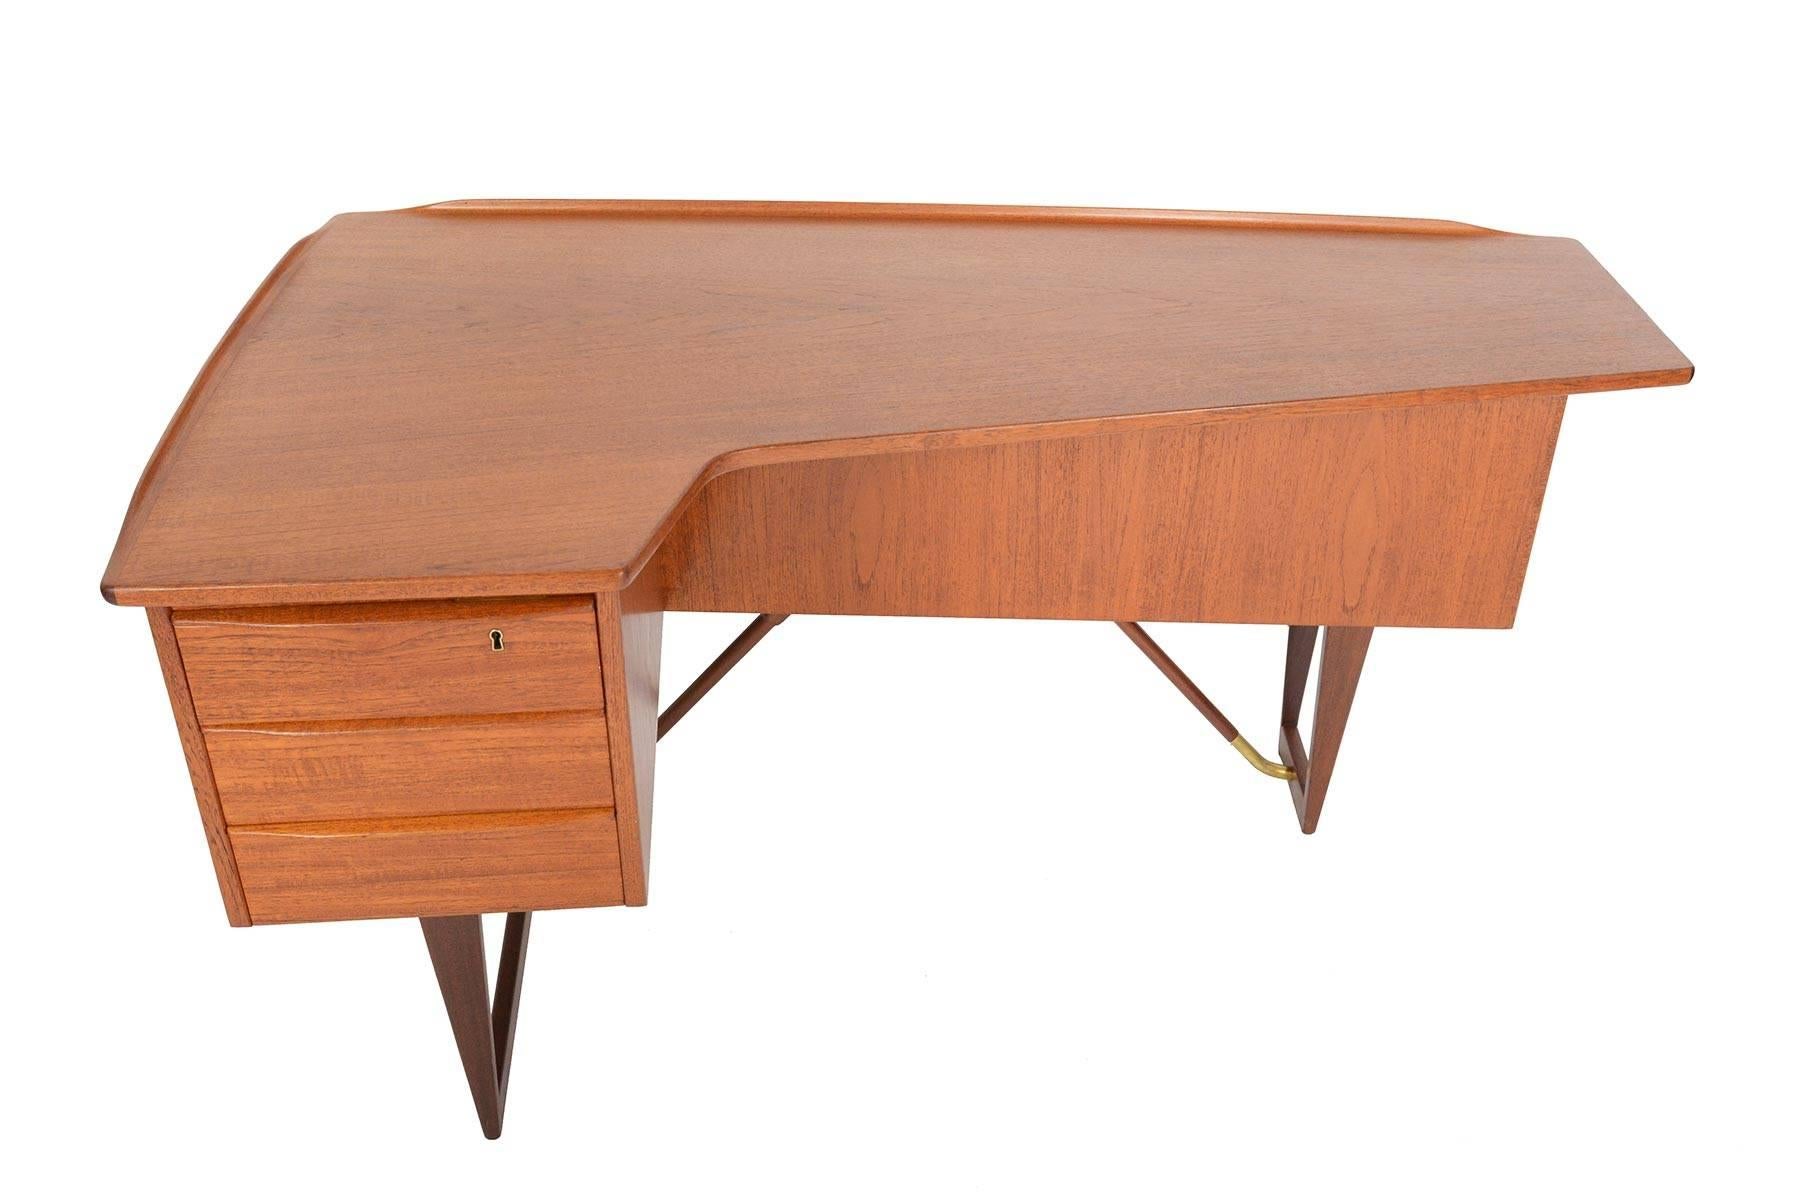 This rare and wonderful Danish modern biomorphic boomerang desk in teak was designed in 1956 by Peter Løvig Nielsen for Hedendsted Møbelindustri. A marvel from every angle, this hallmark piece features a left oriented bank of three drawers. The back